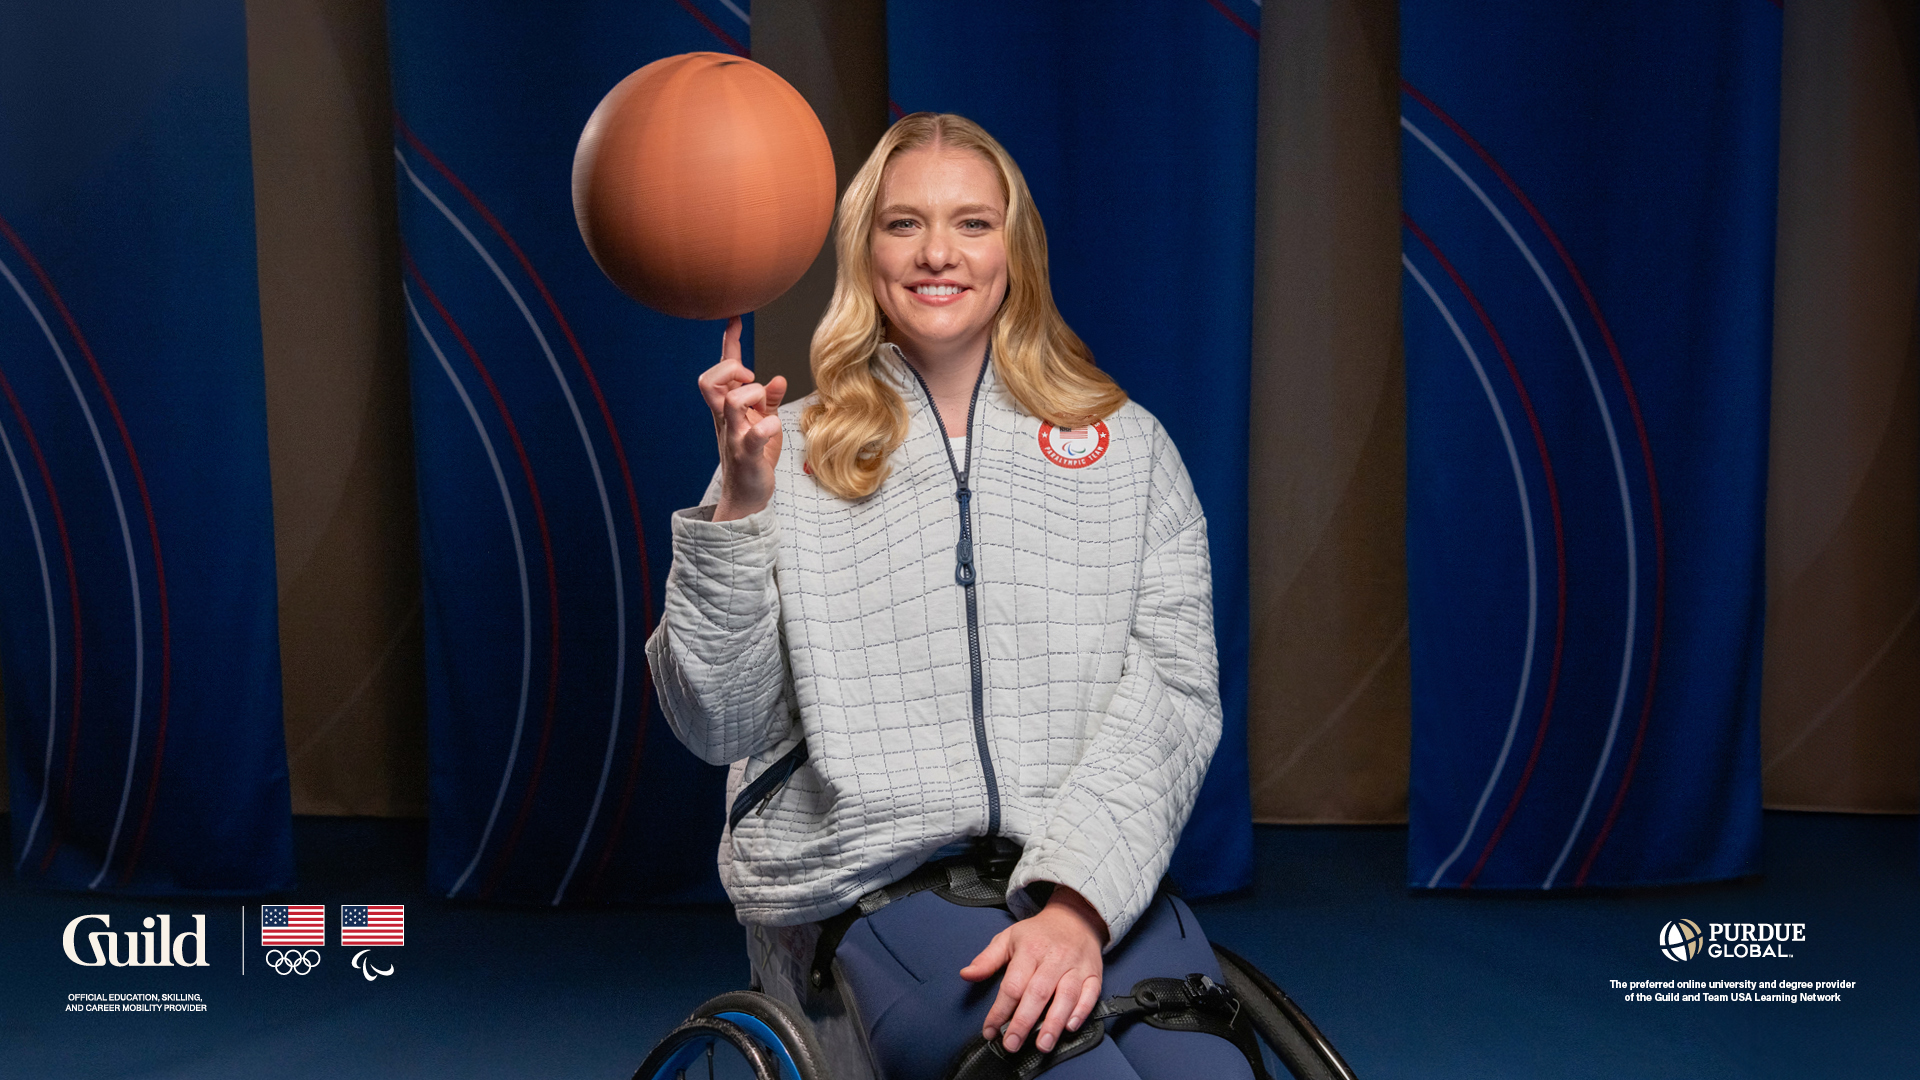 Rose Hollermann, wearing a Team USA jacket, is spinning a basketball on one finger and smiling.